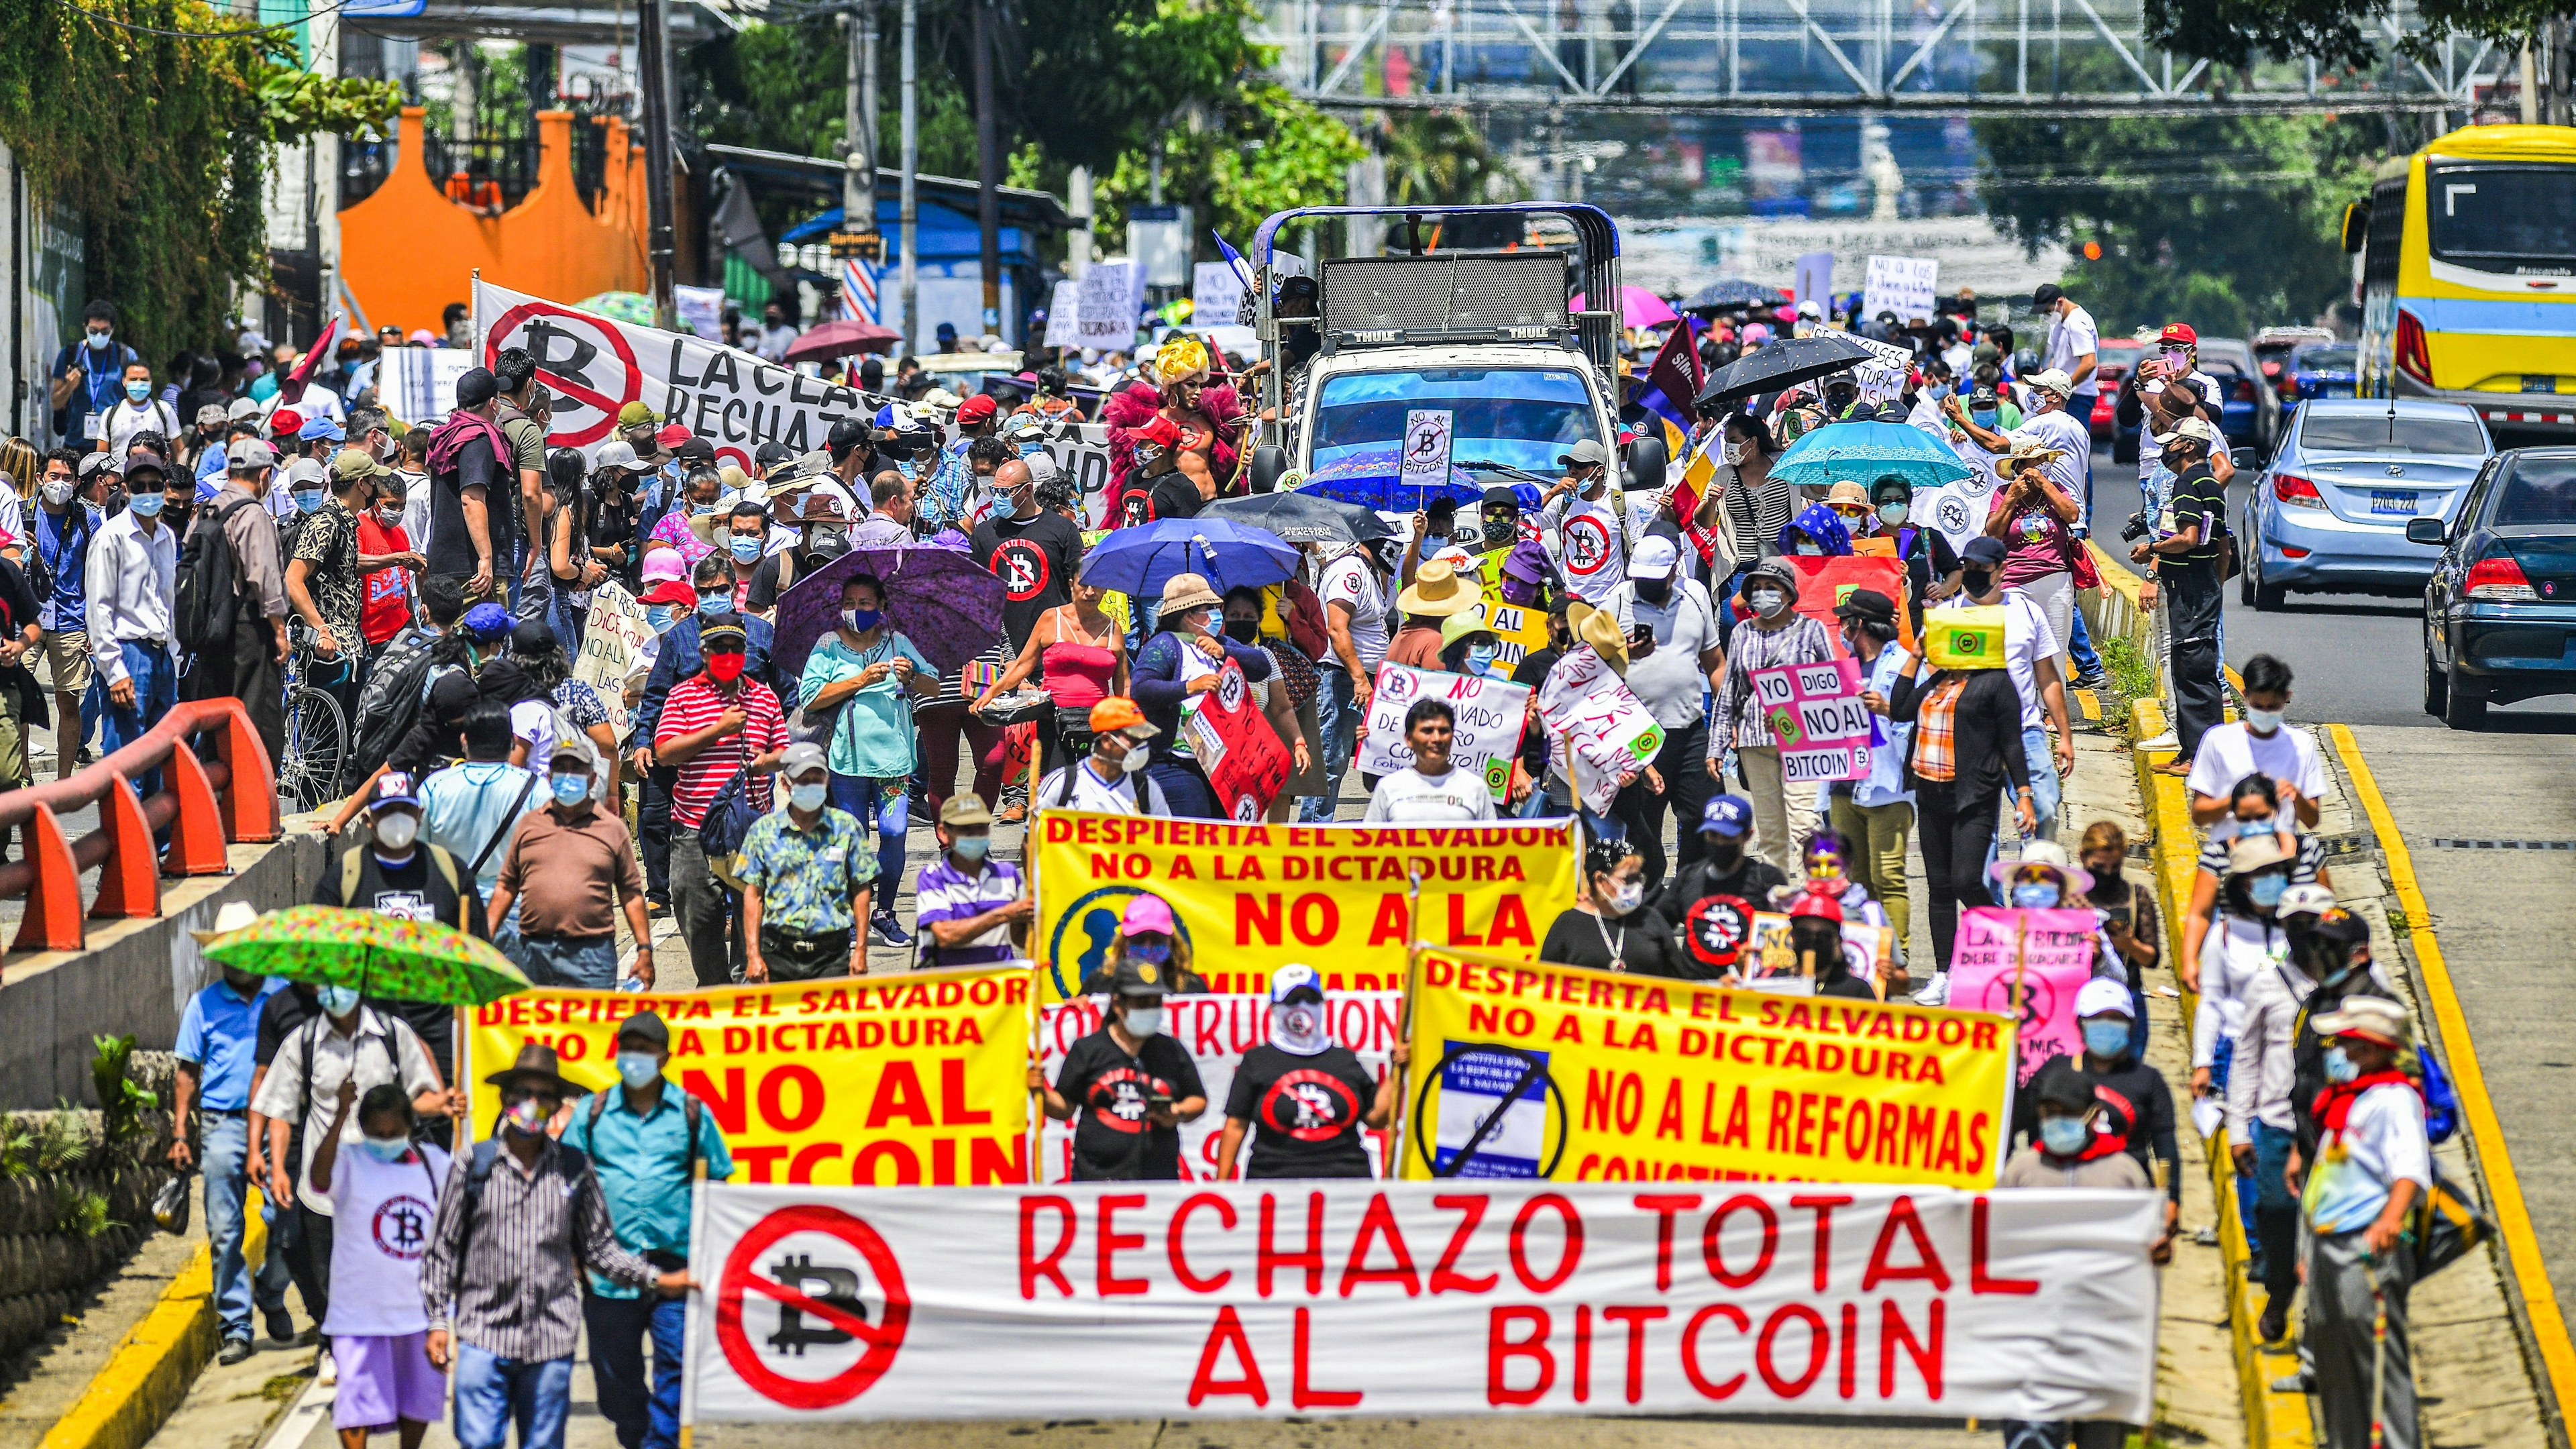 Demonstrators march while holding anti-bitcoin signs during the protest march in San Salvador.